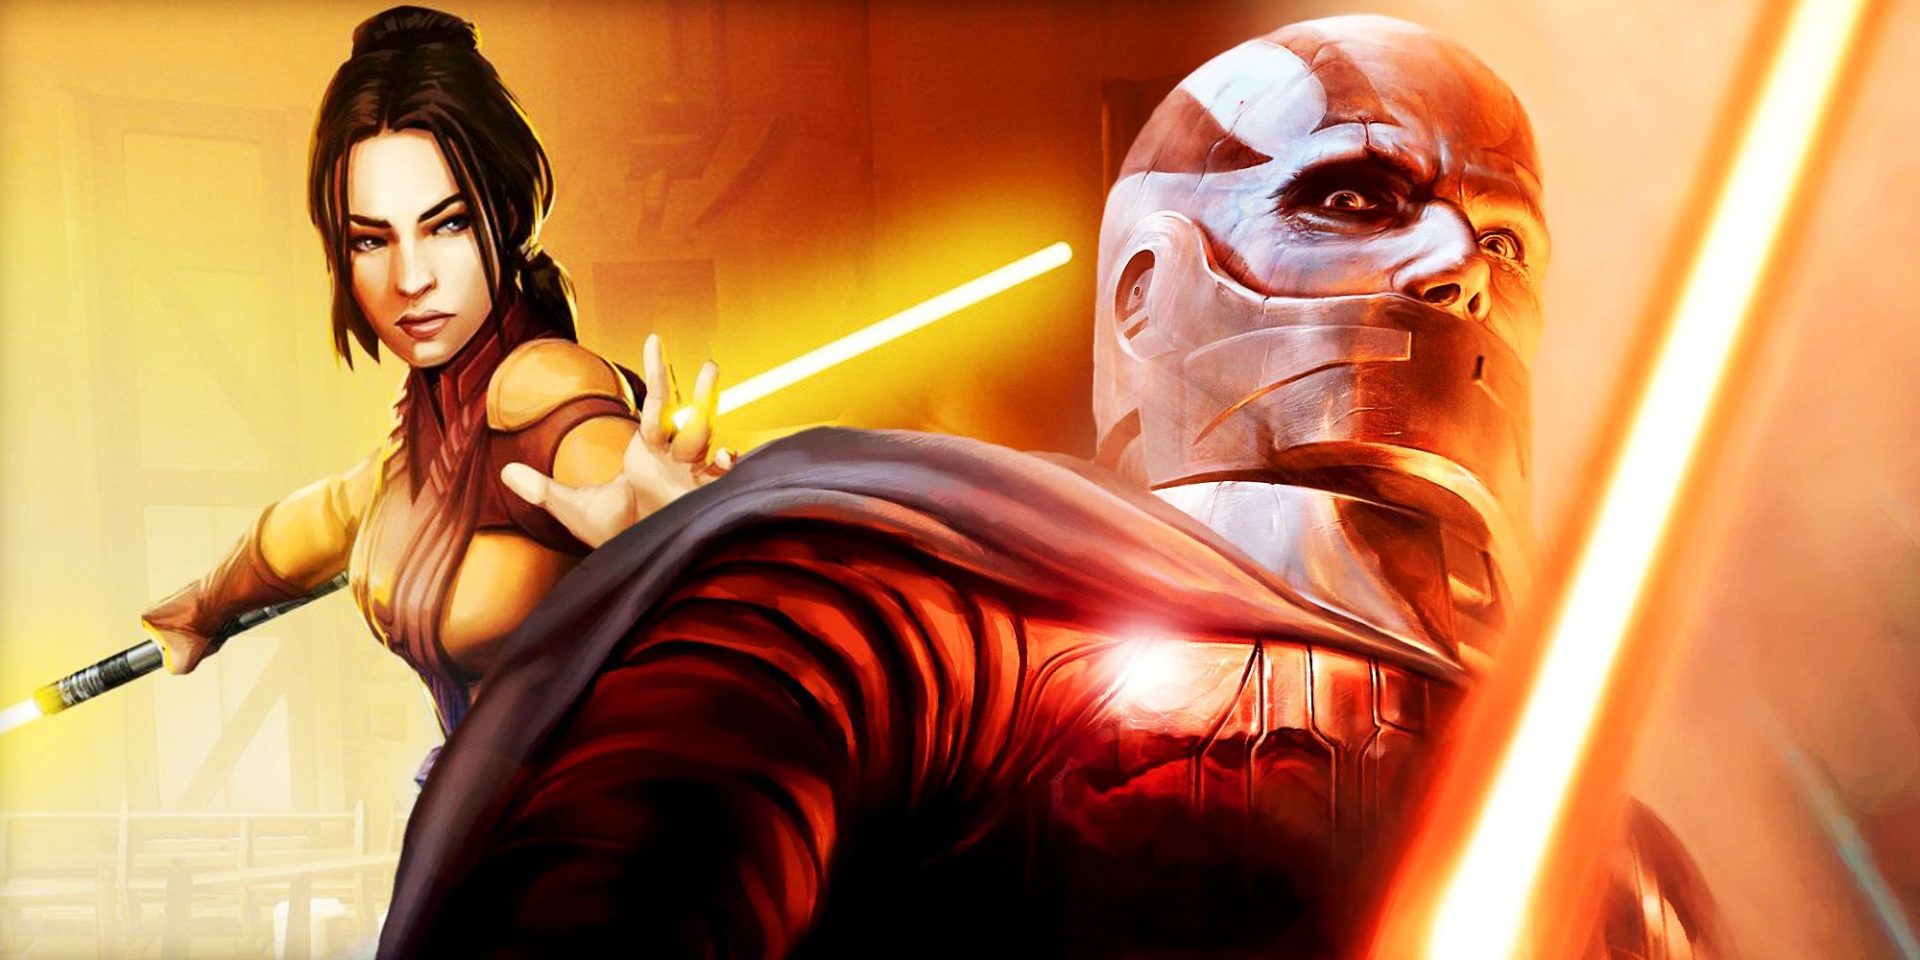 Jedi Knight KOTOR comes to life in stunning Star Wars cosplay